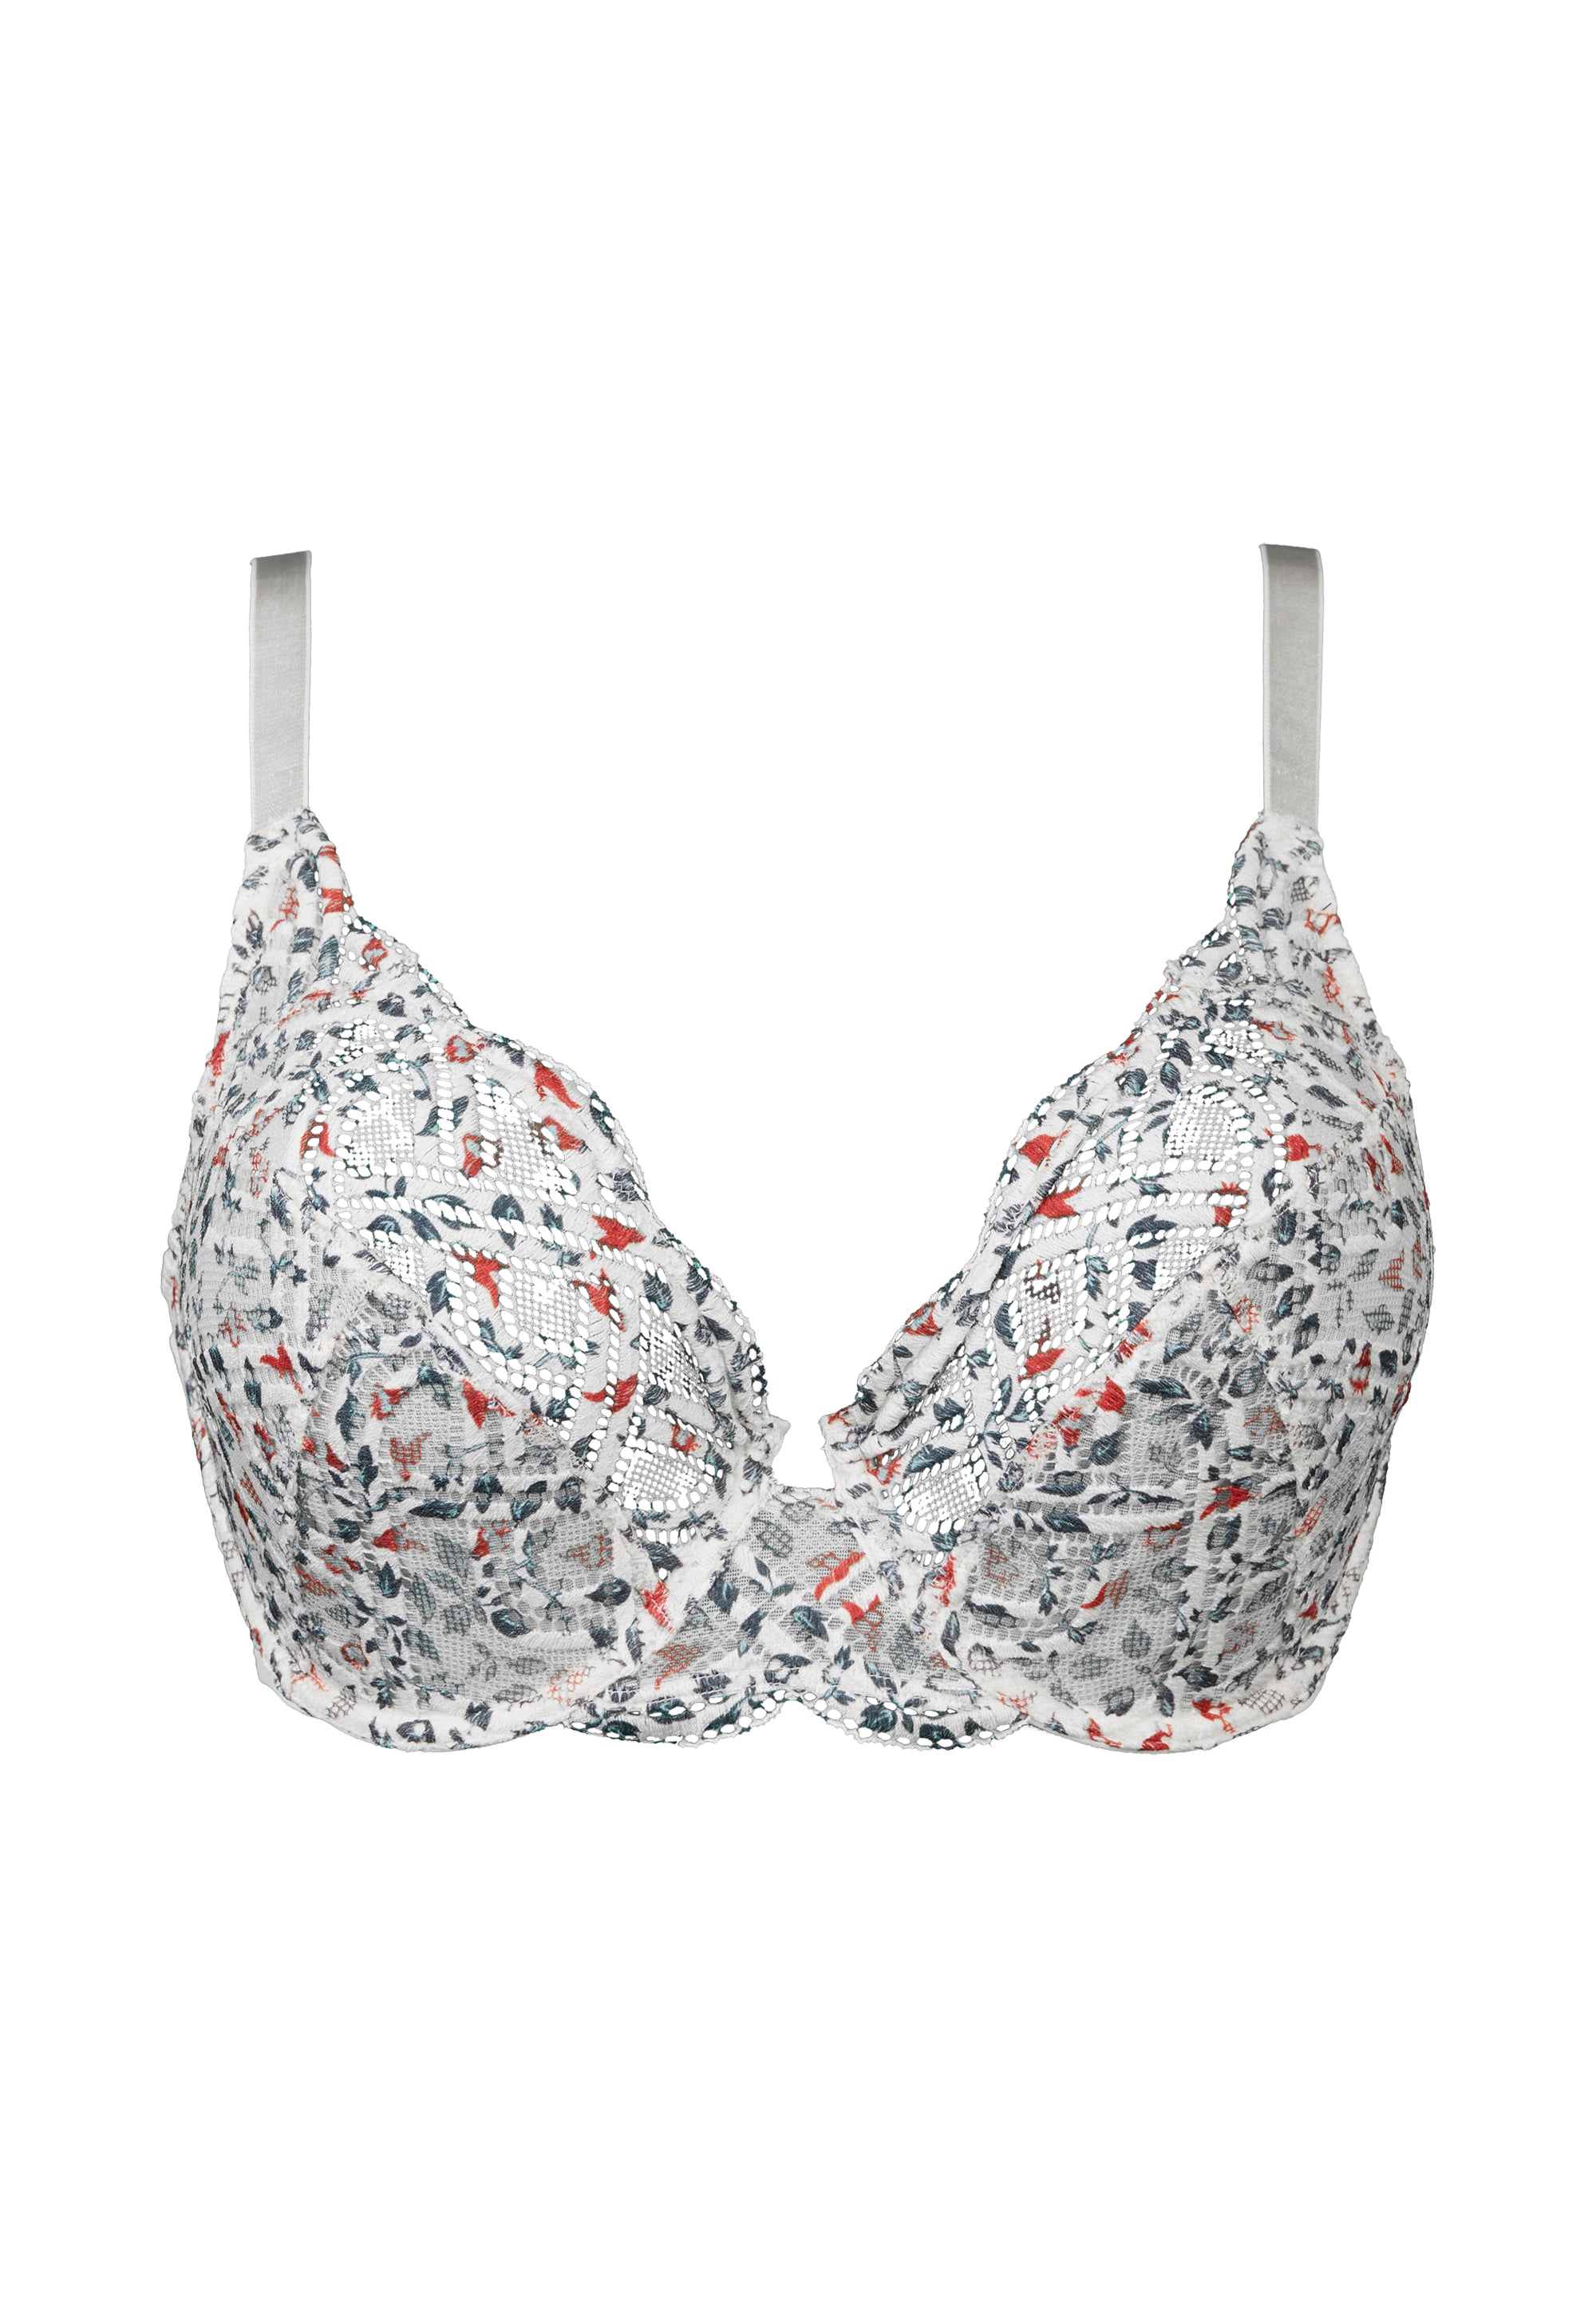 Elise Fantaisy Liberty Print Full Cup Bra Ivory And Cabernet